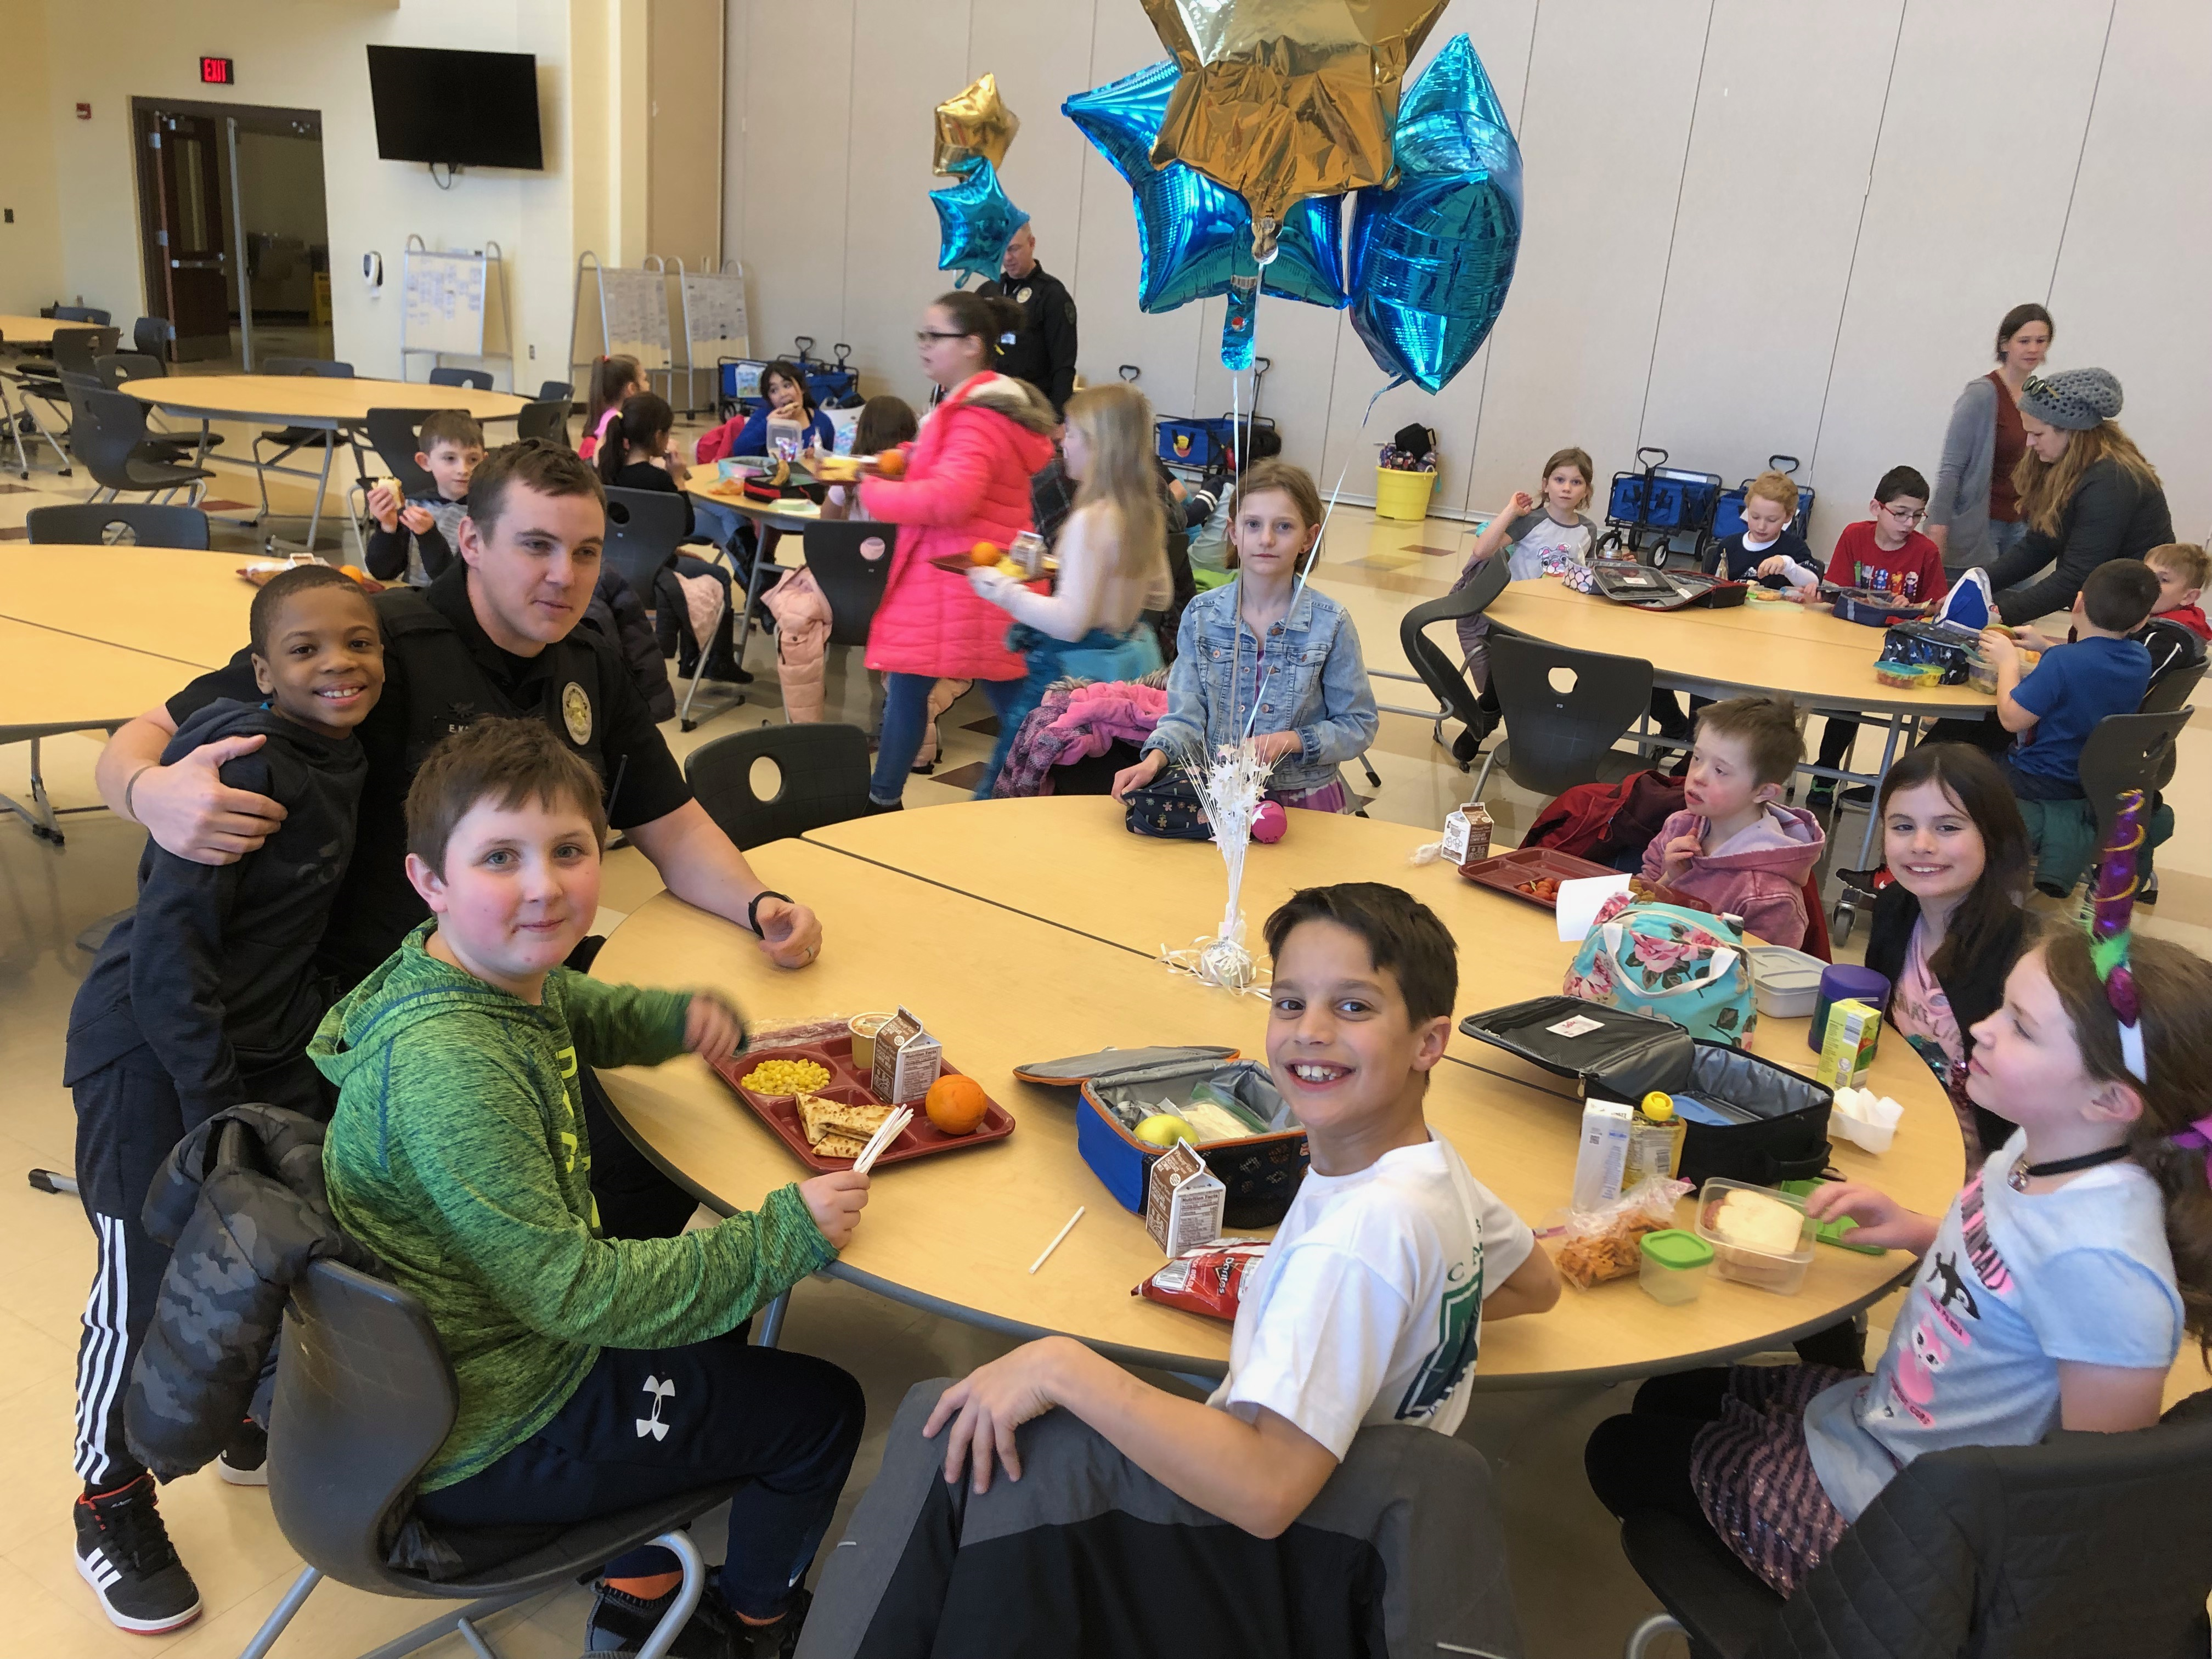 Dyer police officers were invited to have lunch with the students. Each grade level had officers attend and eat lunch with them. Students had the opportunity to show the police officers how to wait in line, grab their lunch, and find a seat in the cafeteria. This was an opportunity for the students and officers to build positive relationships, the students loved asking questions and telling them stories! Many students even wrote letters to the policemen, we loved showing our appreciation for everything they do!